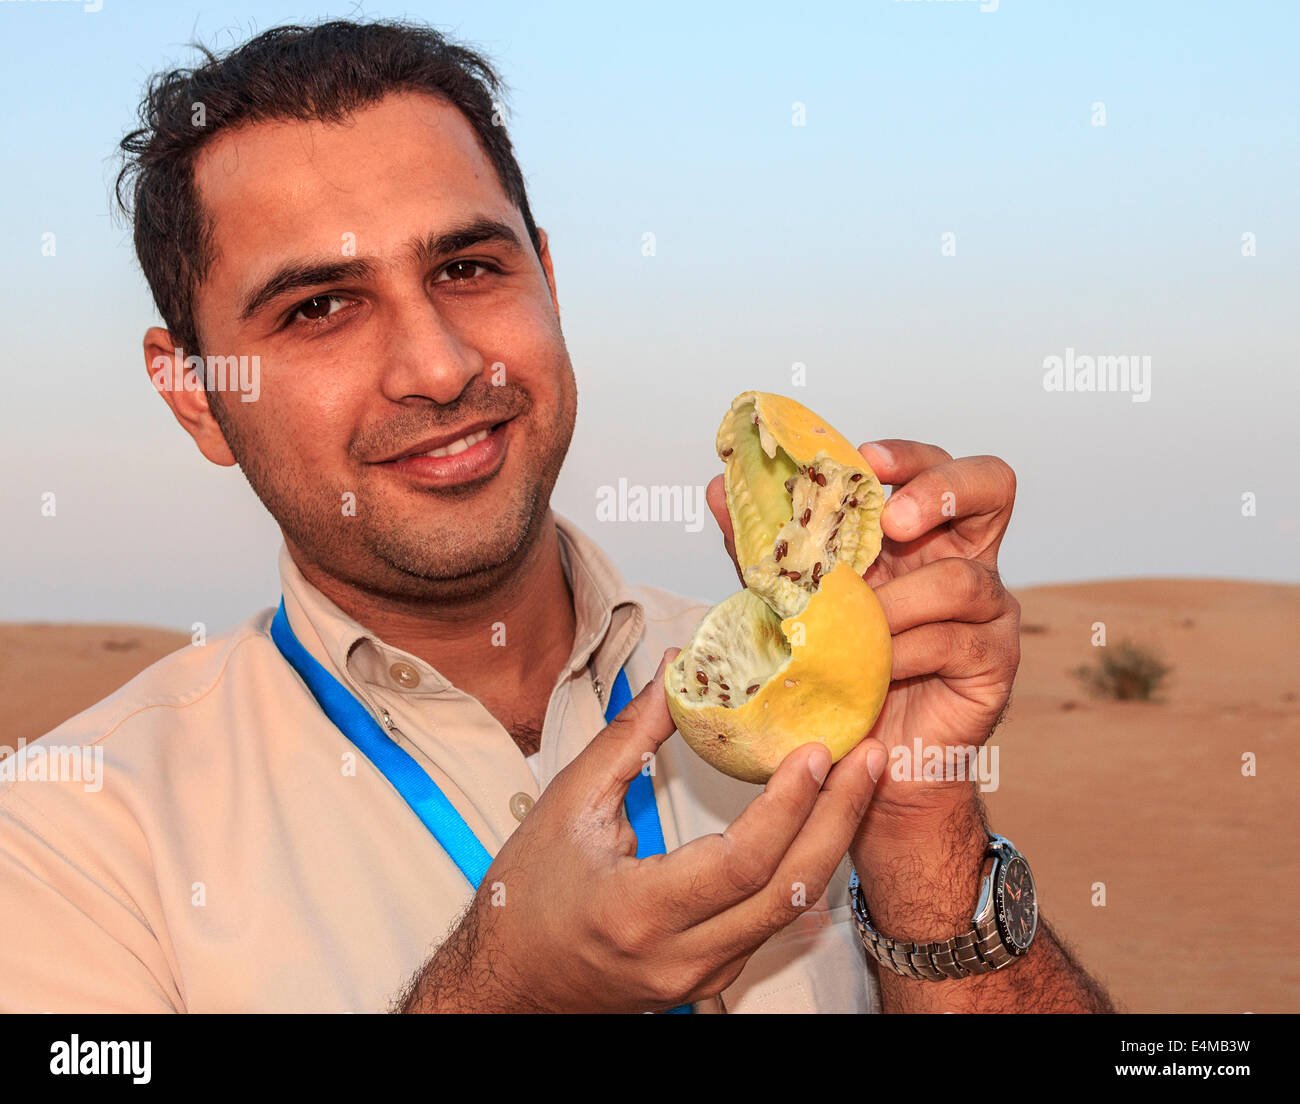 Desert gourd (Citrullus colocynthis, also called desert scotch, a desert scrub fruit used as medicine by Bedouins in traditional Stock Photo